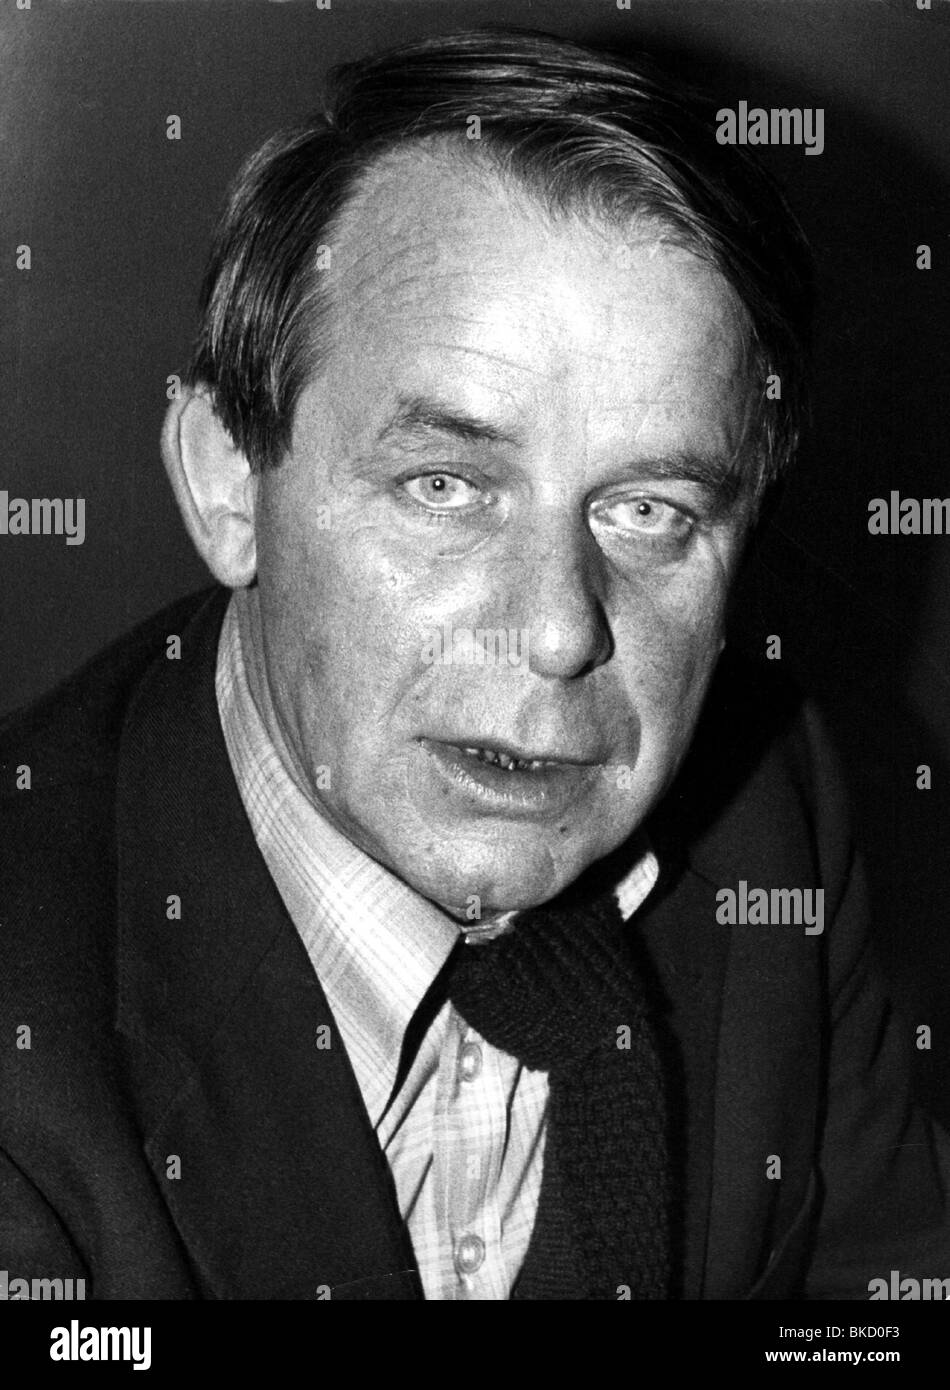 Lenz, Siegfried, 17.3.1926 - 7.10.2014, German author / writer, Peace Prize of the German Book Trade 1988, portrait, , Stock Photo